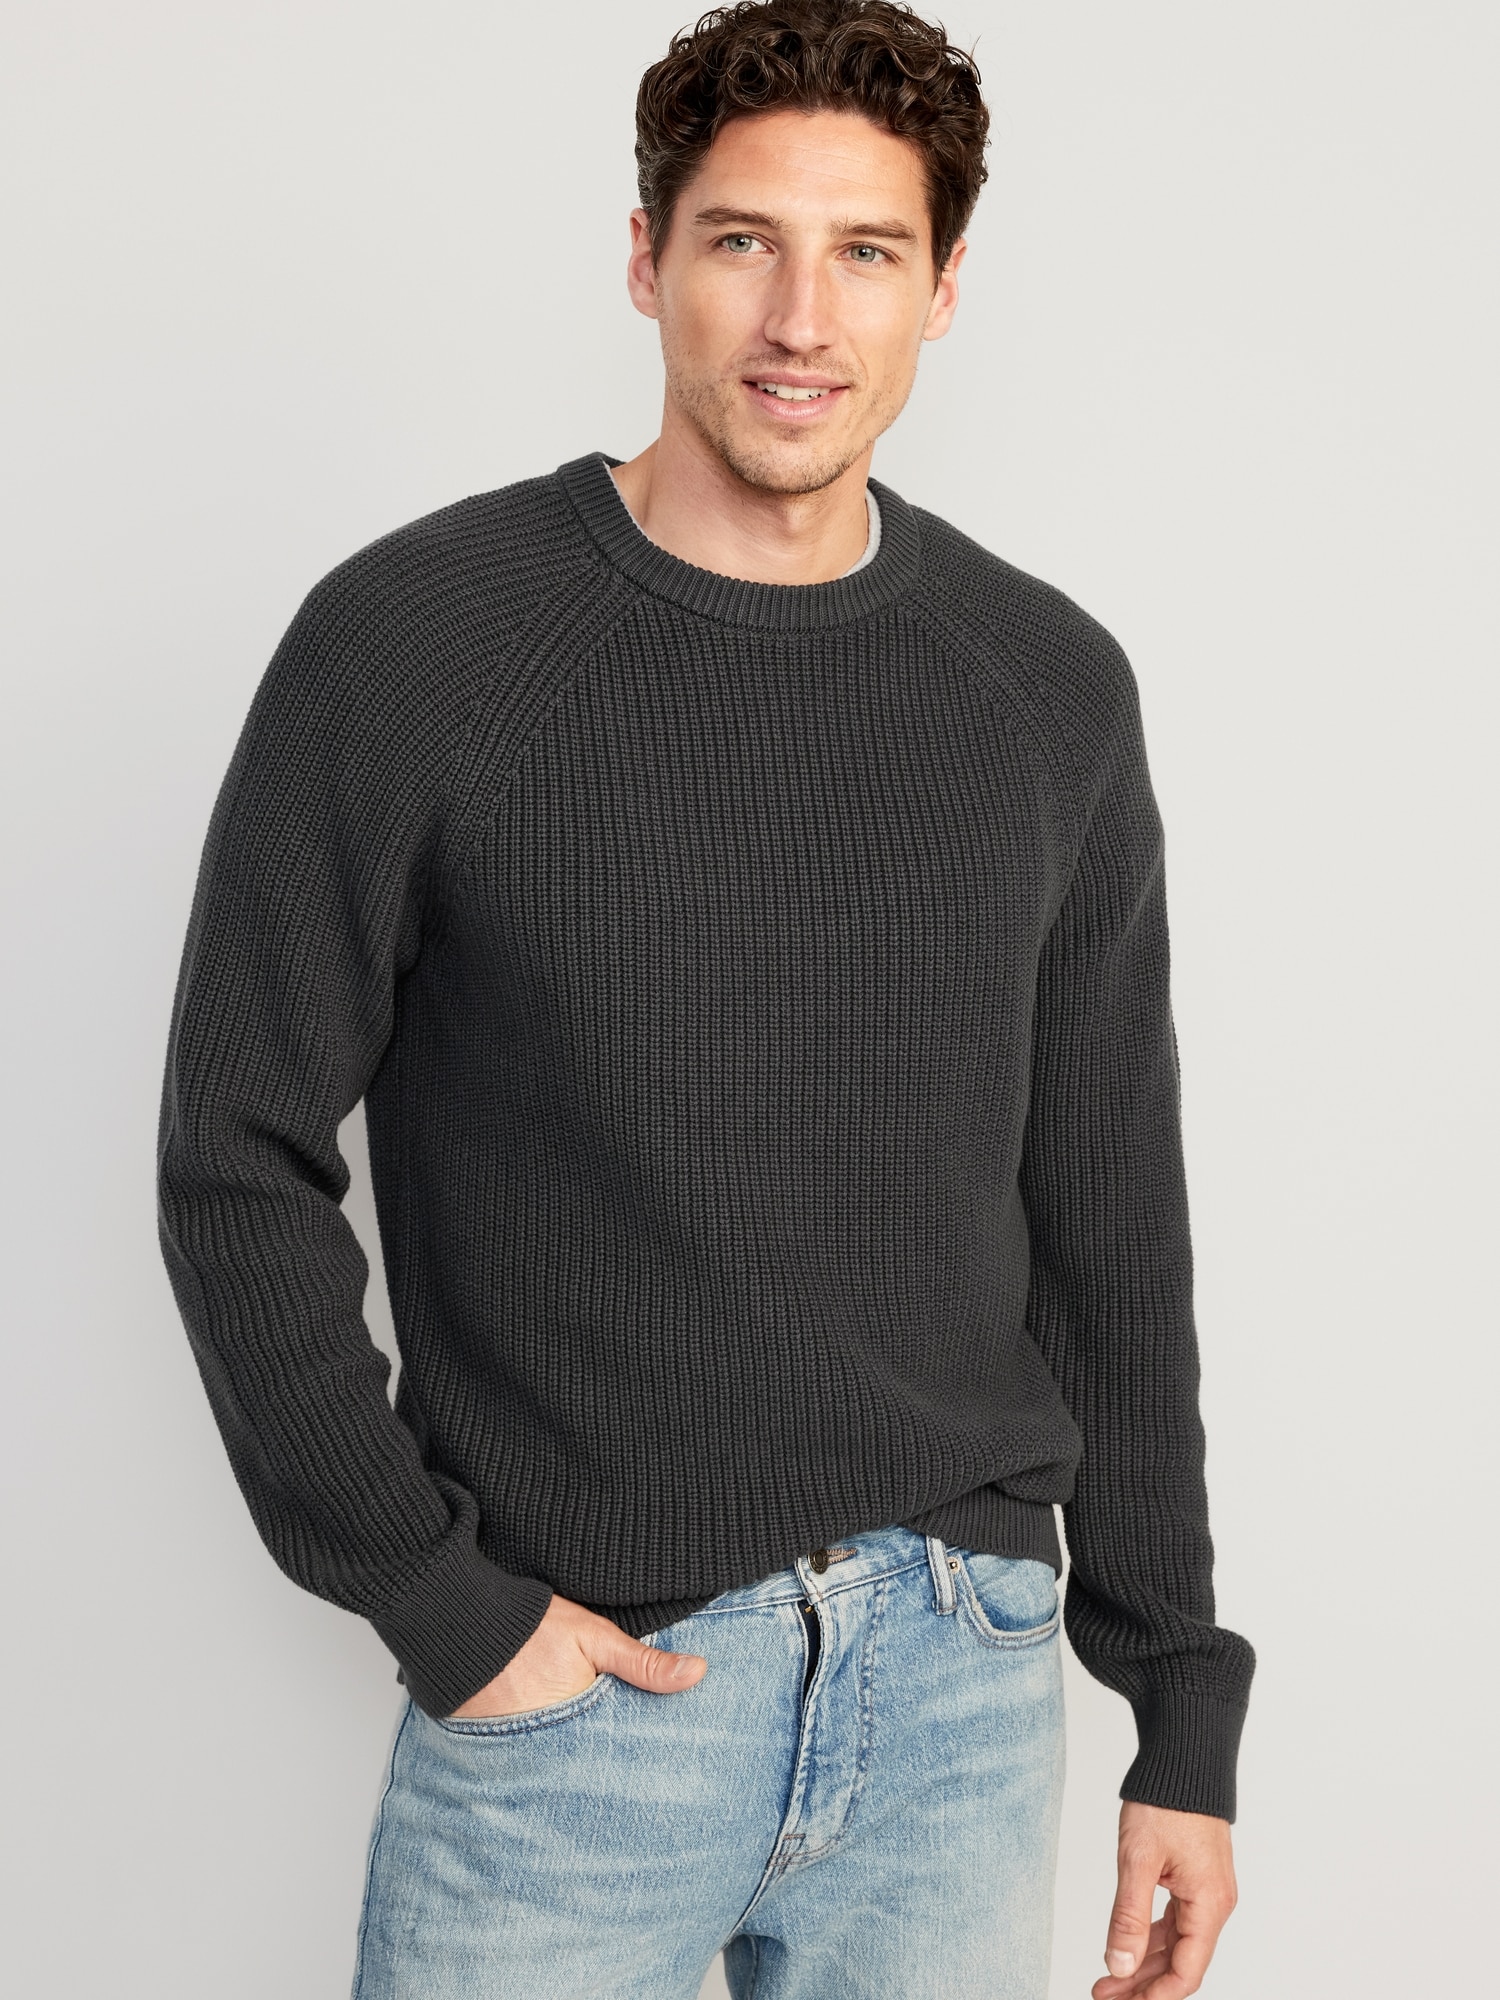 Which Sweaters Are Attractive?, Man's Guide To Choosing A Sweater, V Neck, Crew Neck